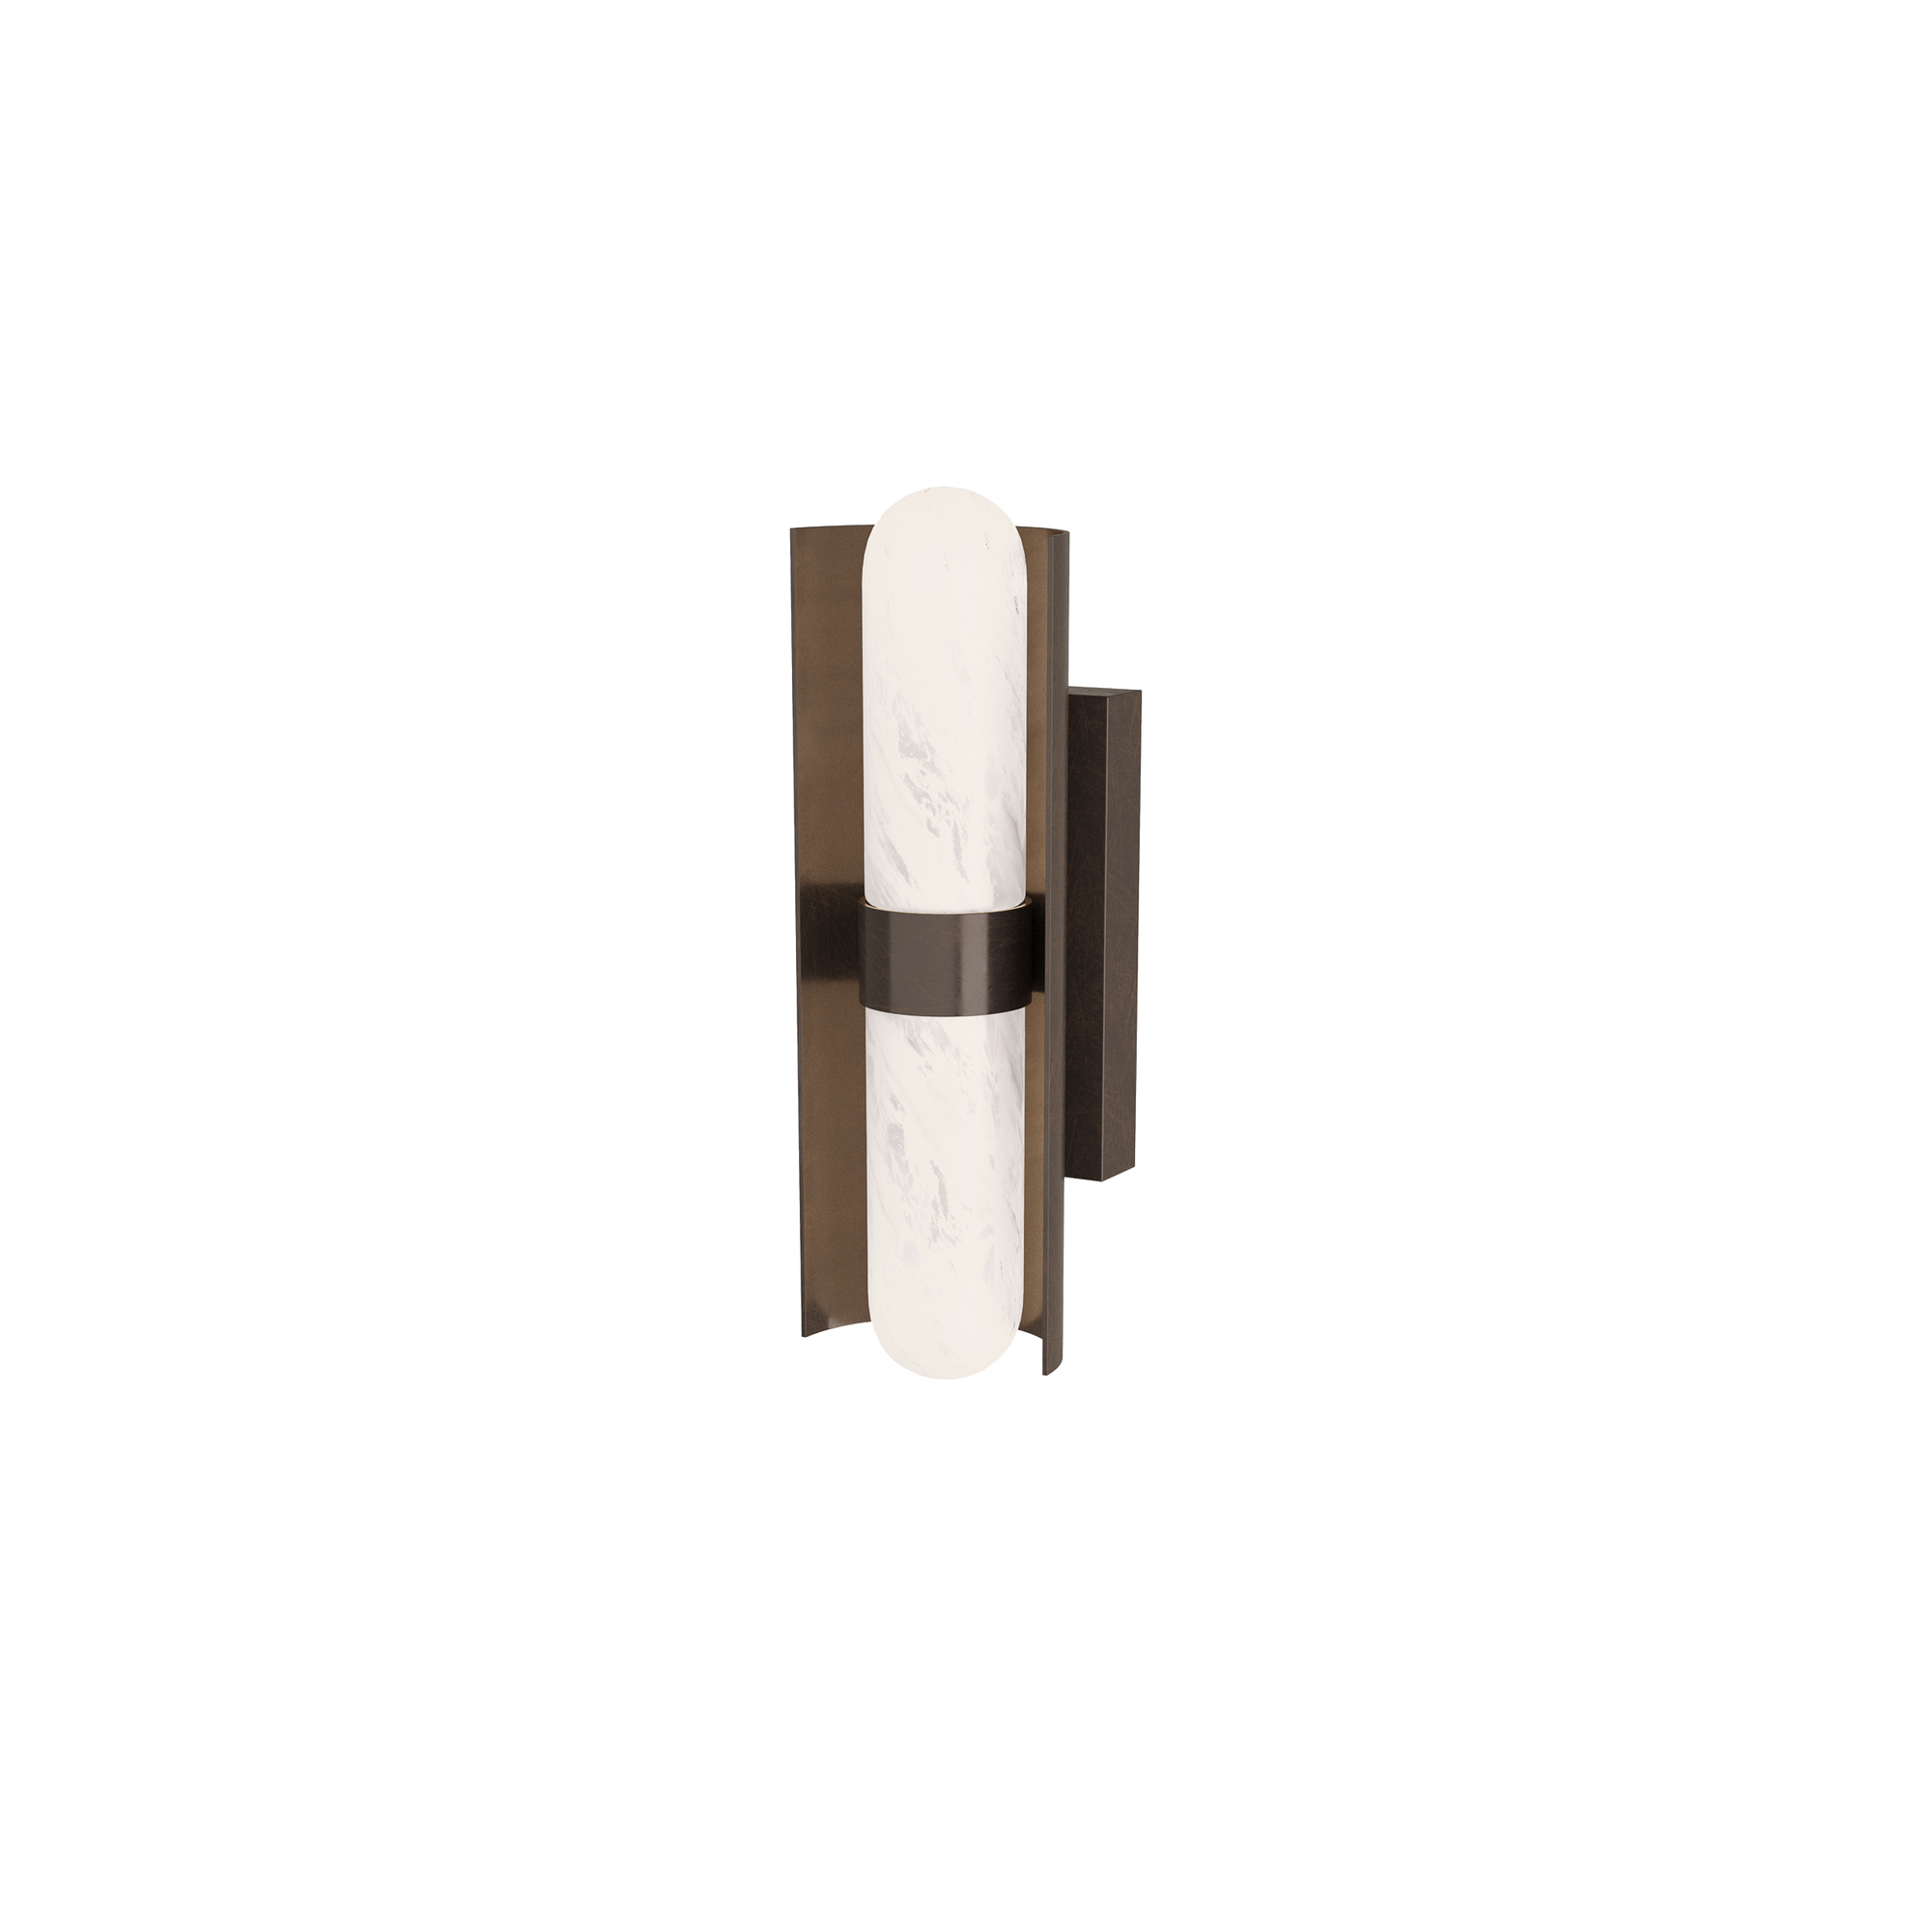 The Bretman Wall Sconce offers a brilliantly simple yet elegant lighting solution with its tubular glass in a matte swirled finish, complemented by a steel backplate in English Bro